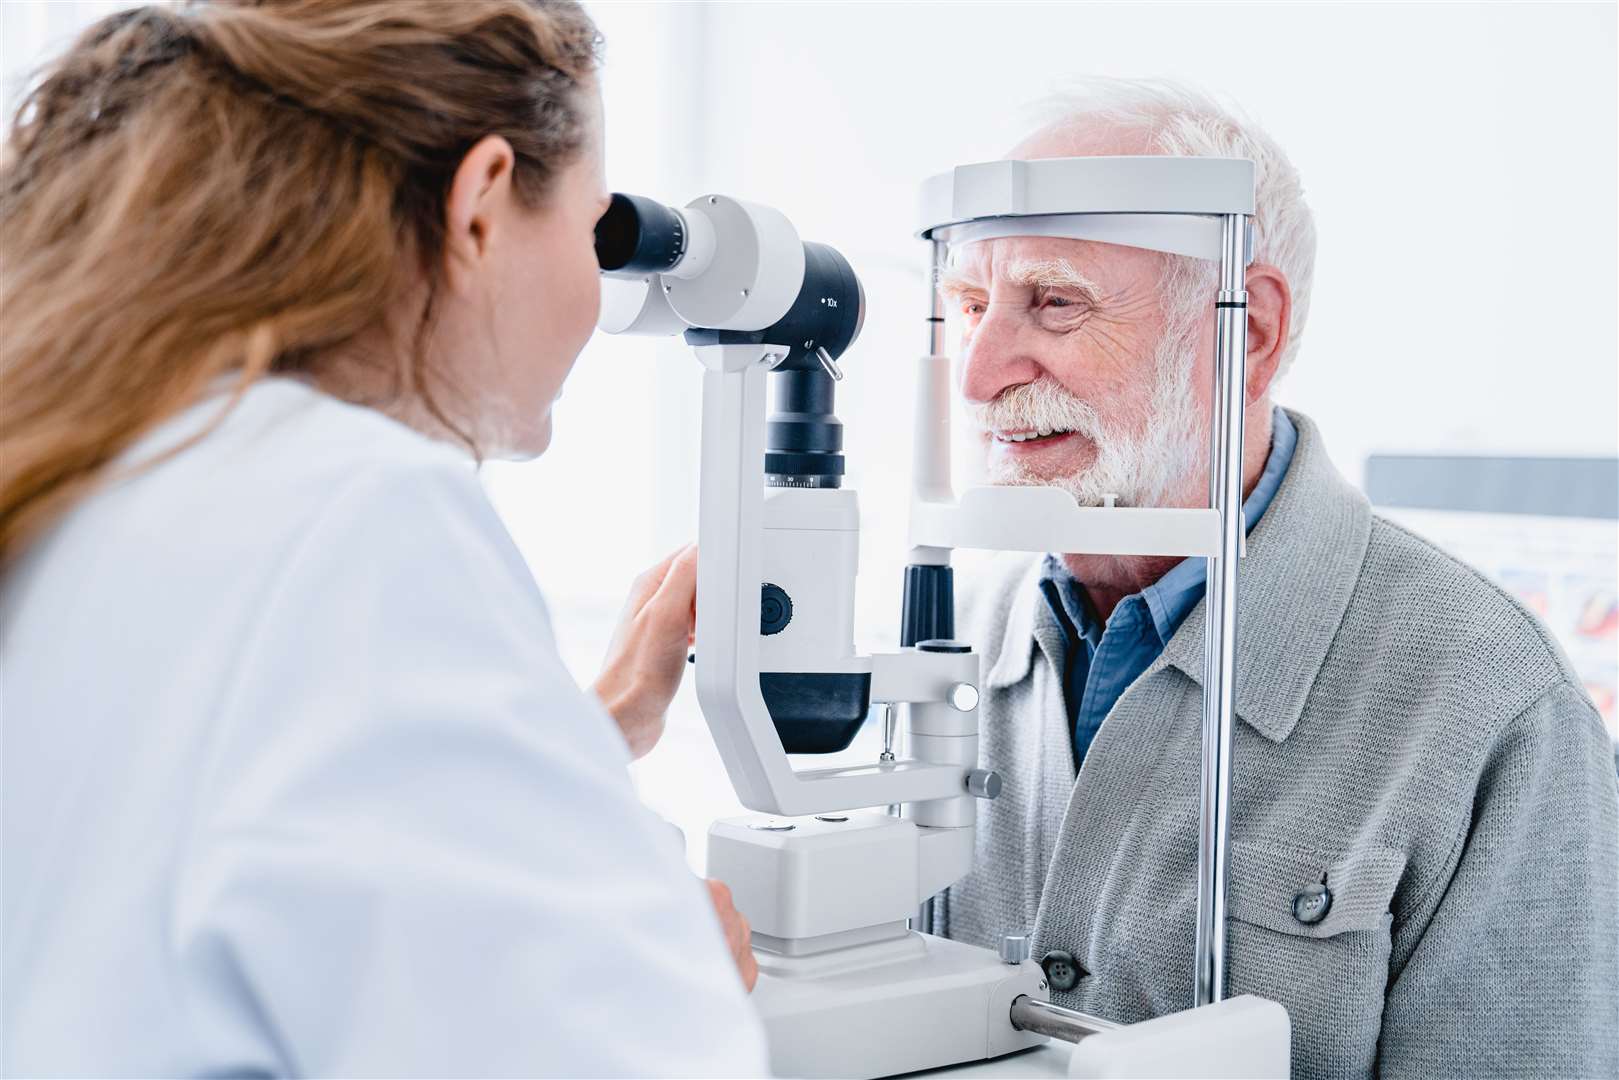 It is affecting many ophthalmology patients. Picture: Getty Images/iStockphoto